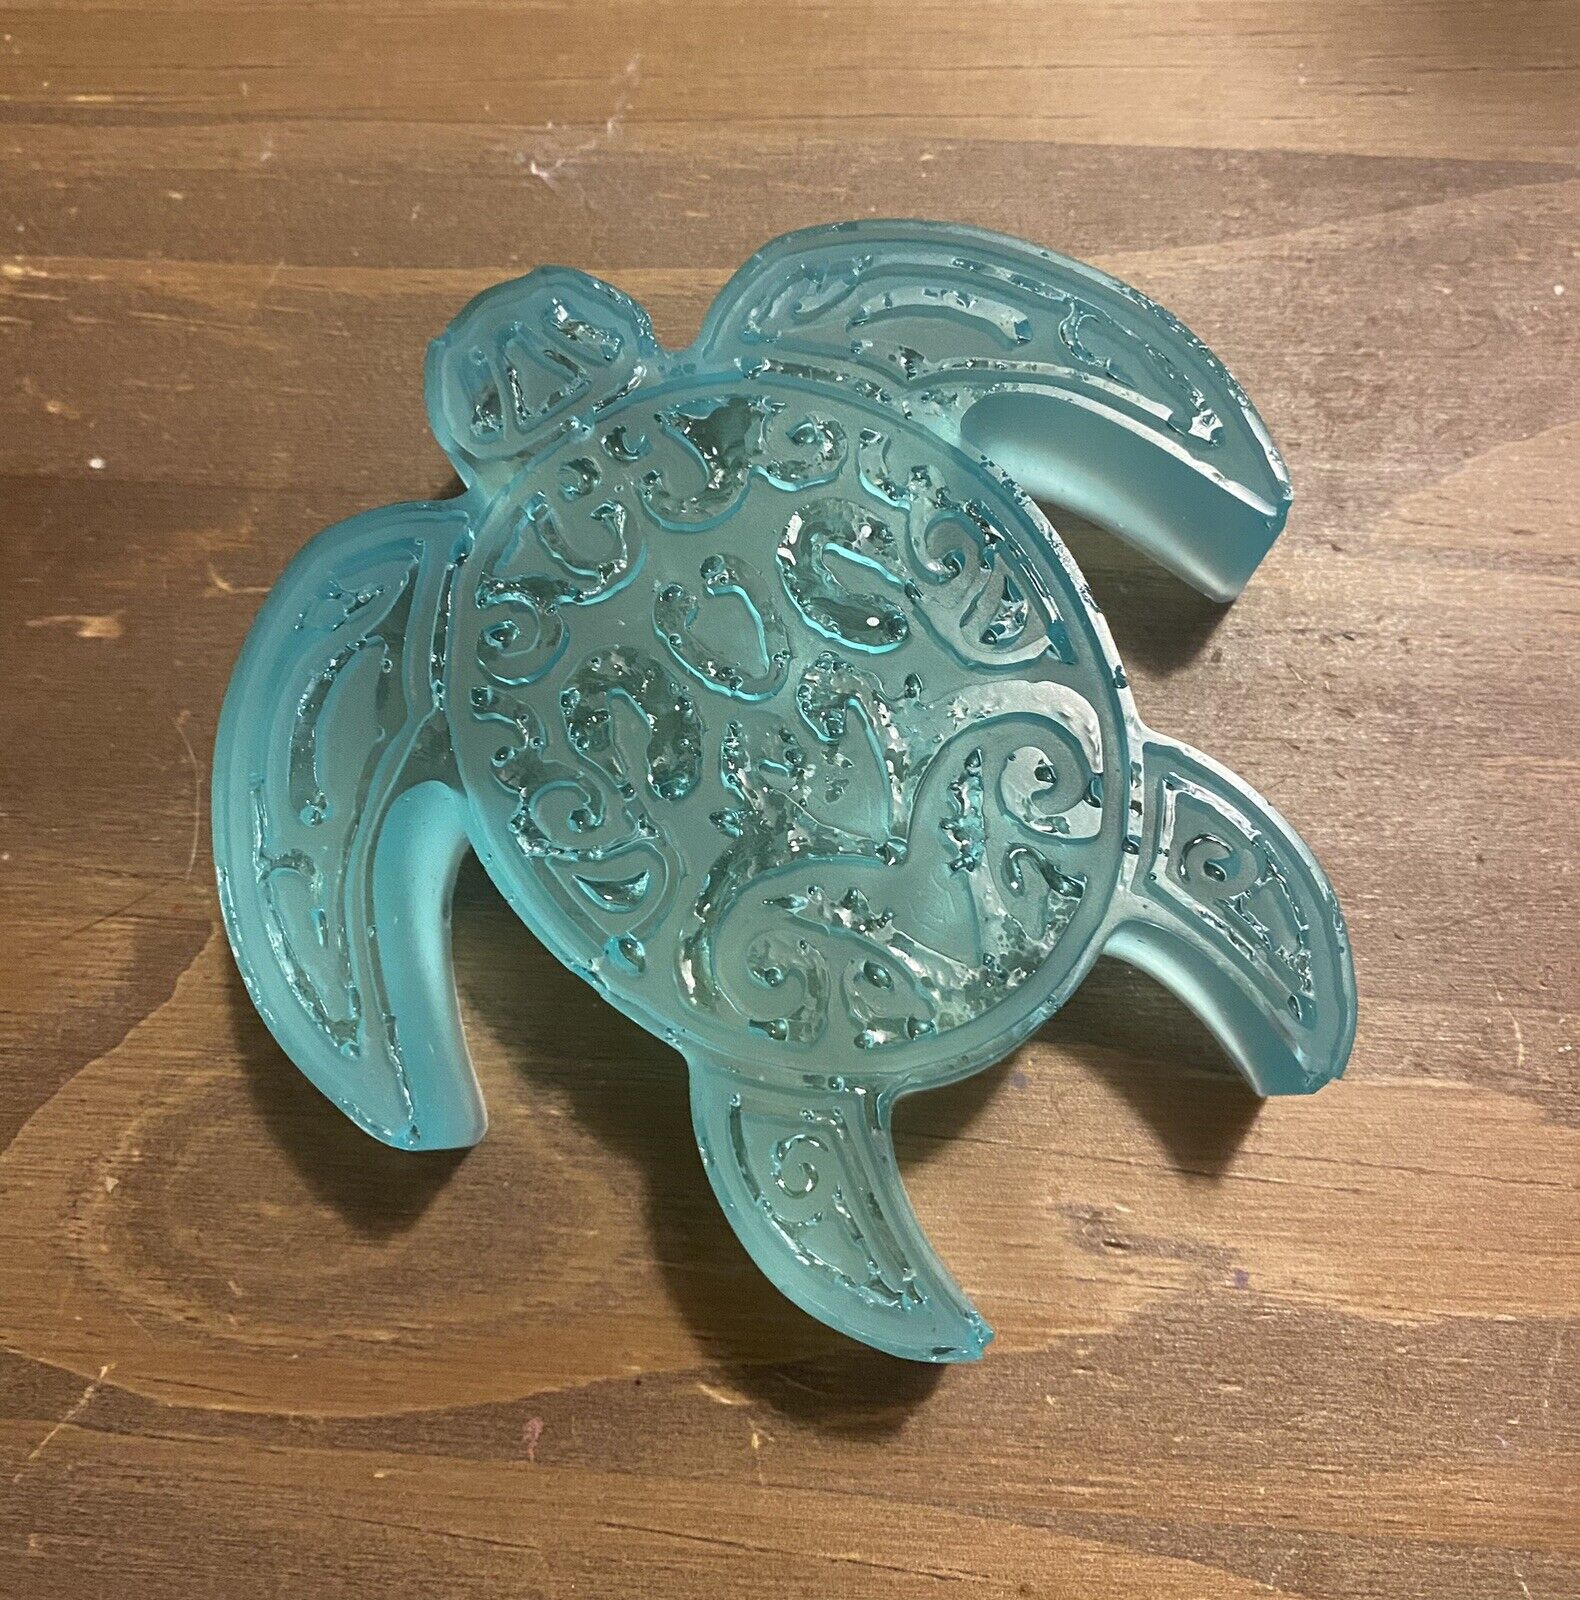 New and Unique, One Of A Kind, Small Sea Turtle Trinket / Paper Weight Art Piece